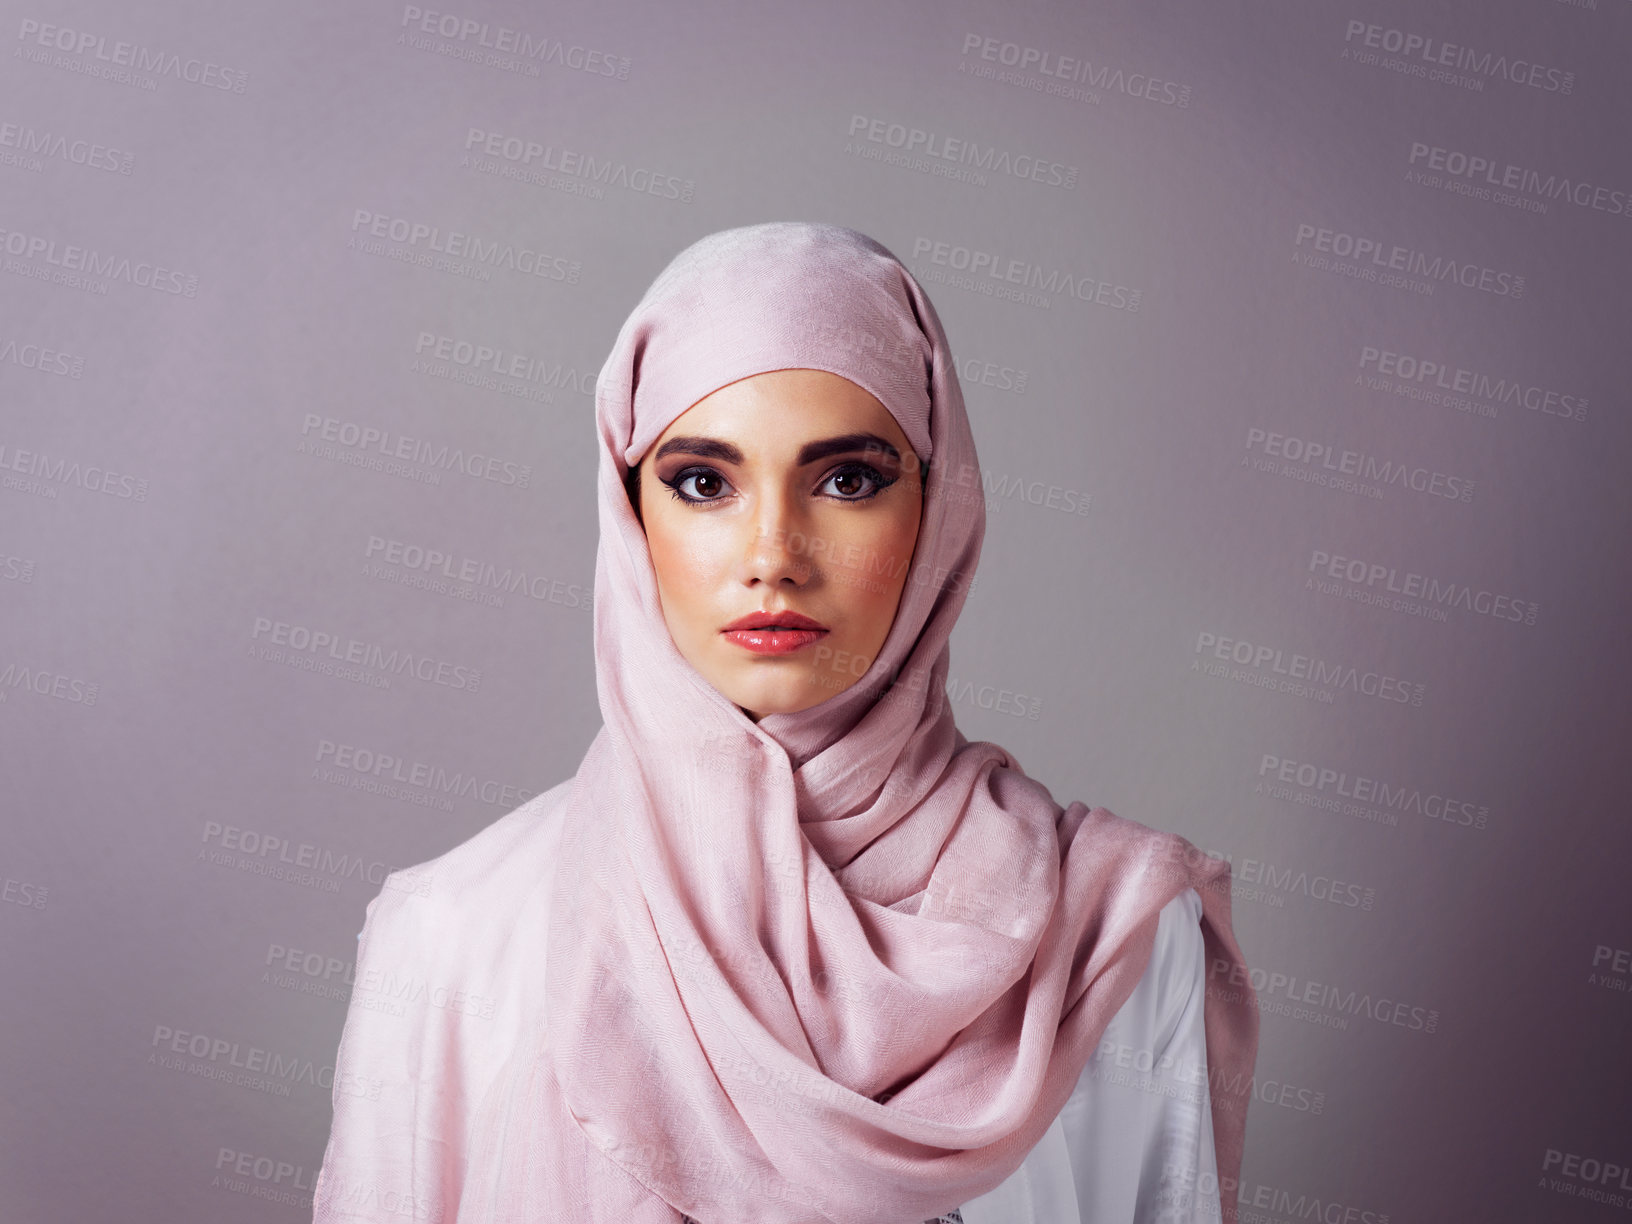 Buy stock photo Studio portrait of a cheerful young woman wearing a colorful head scarf while posing against a grey background